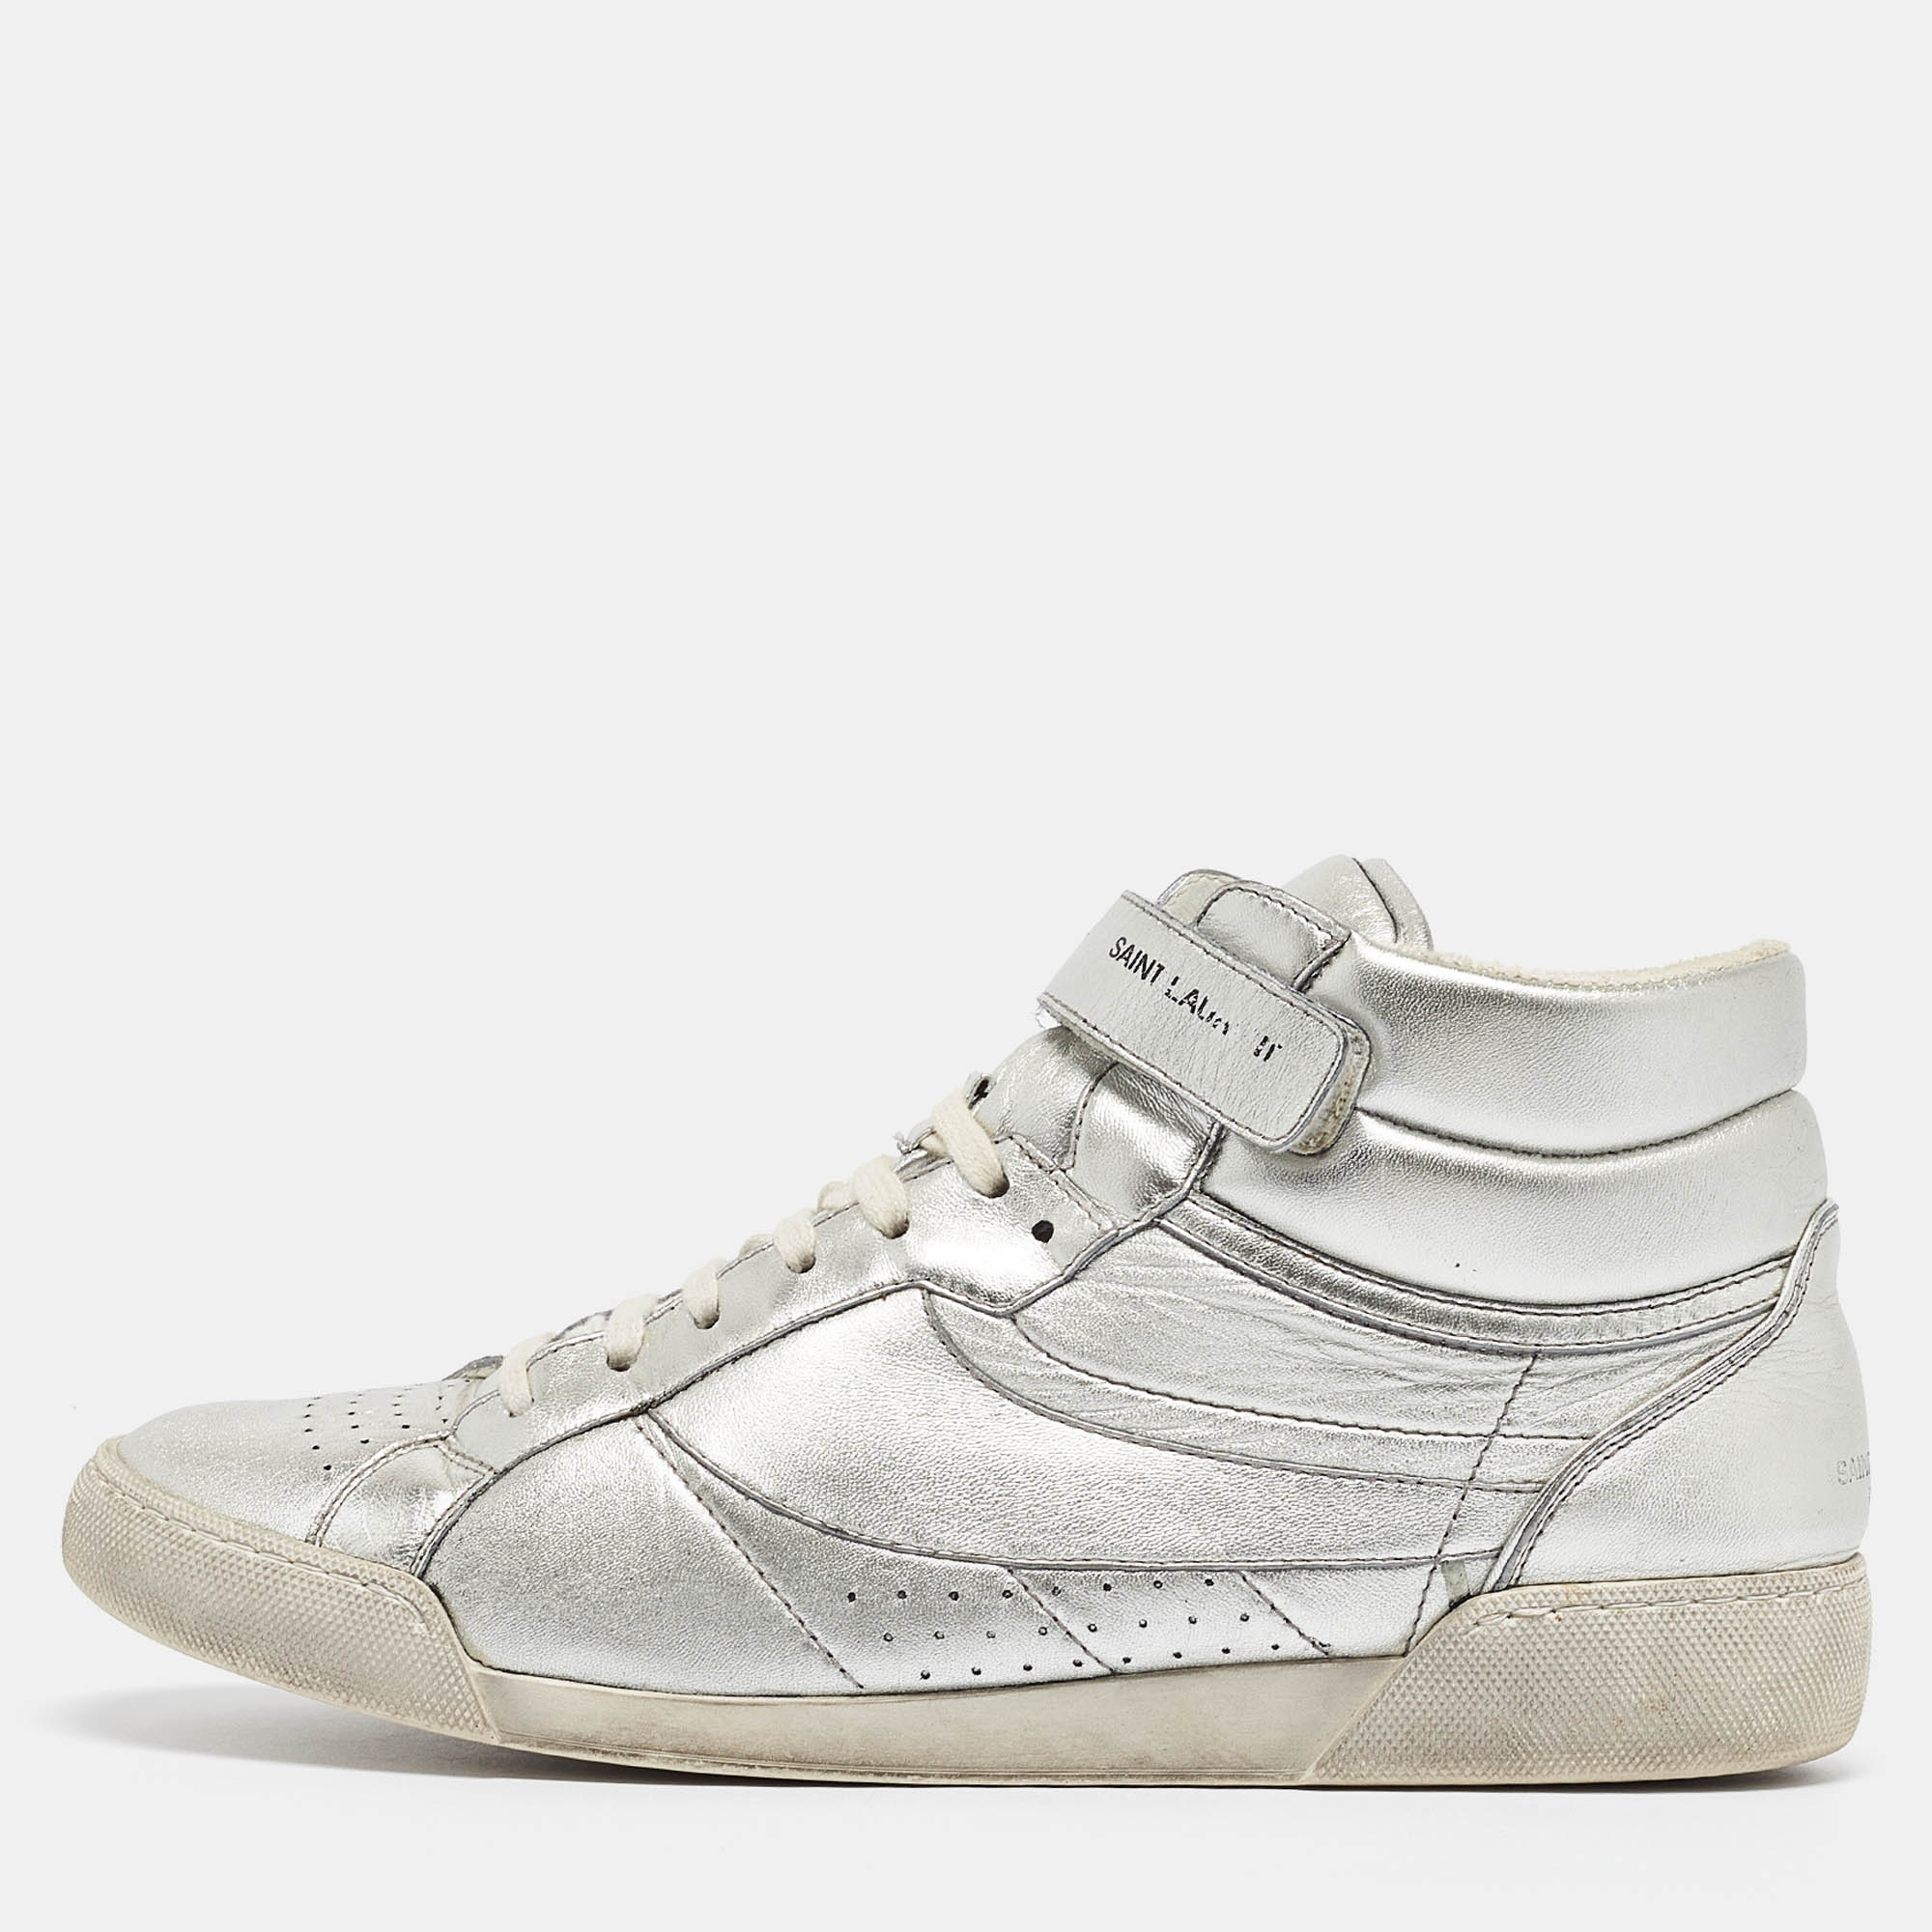 

Saint Laurent Silver Foil Leather Perforated High Top Sneakers Size